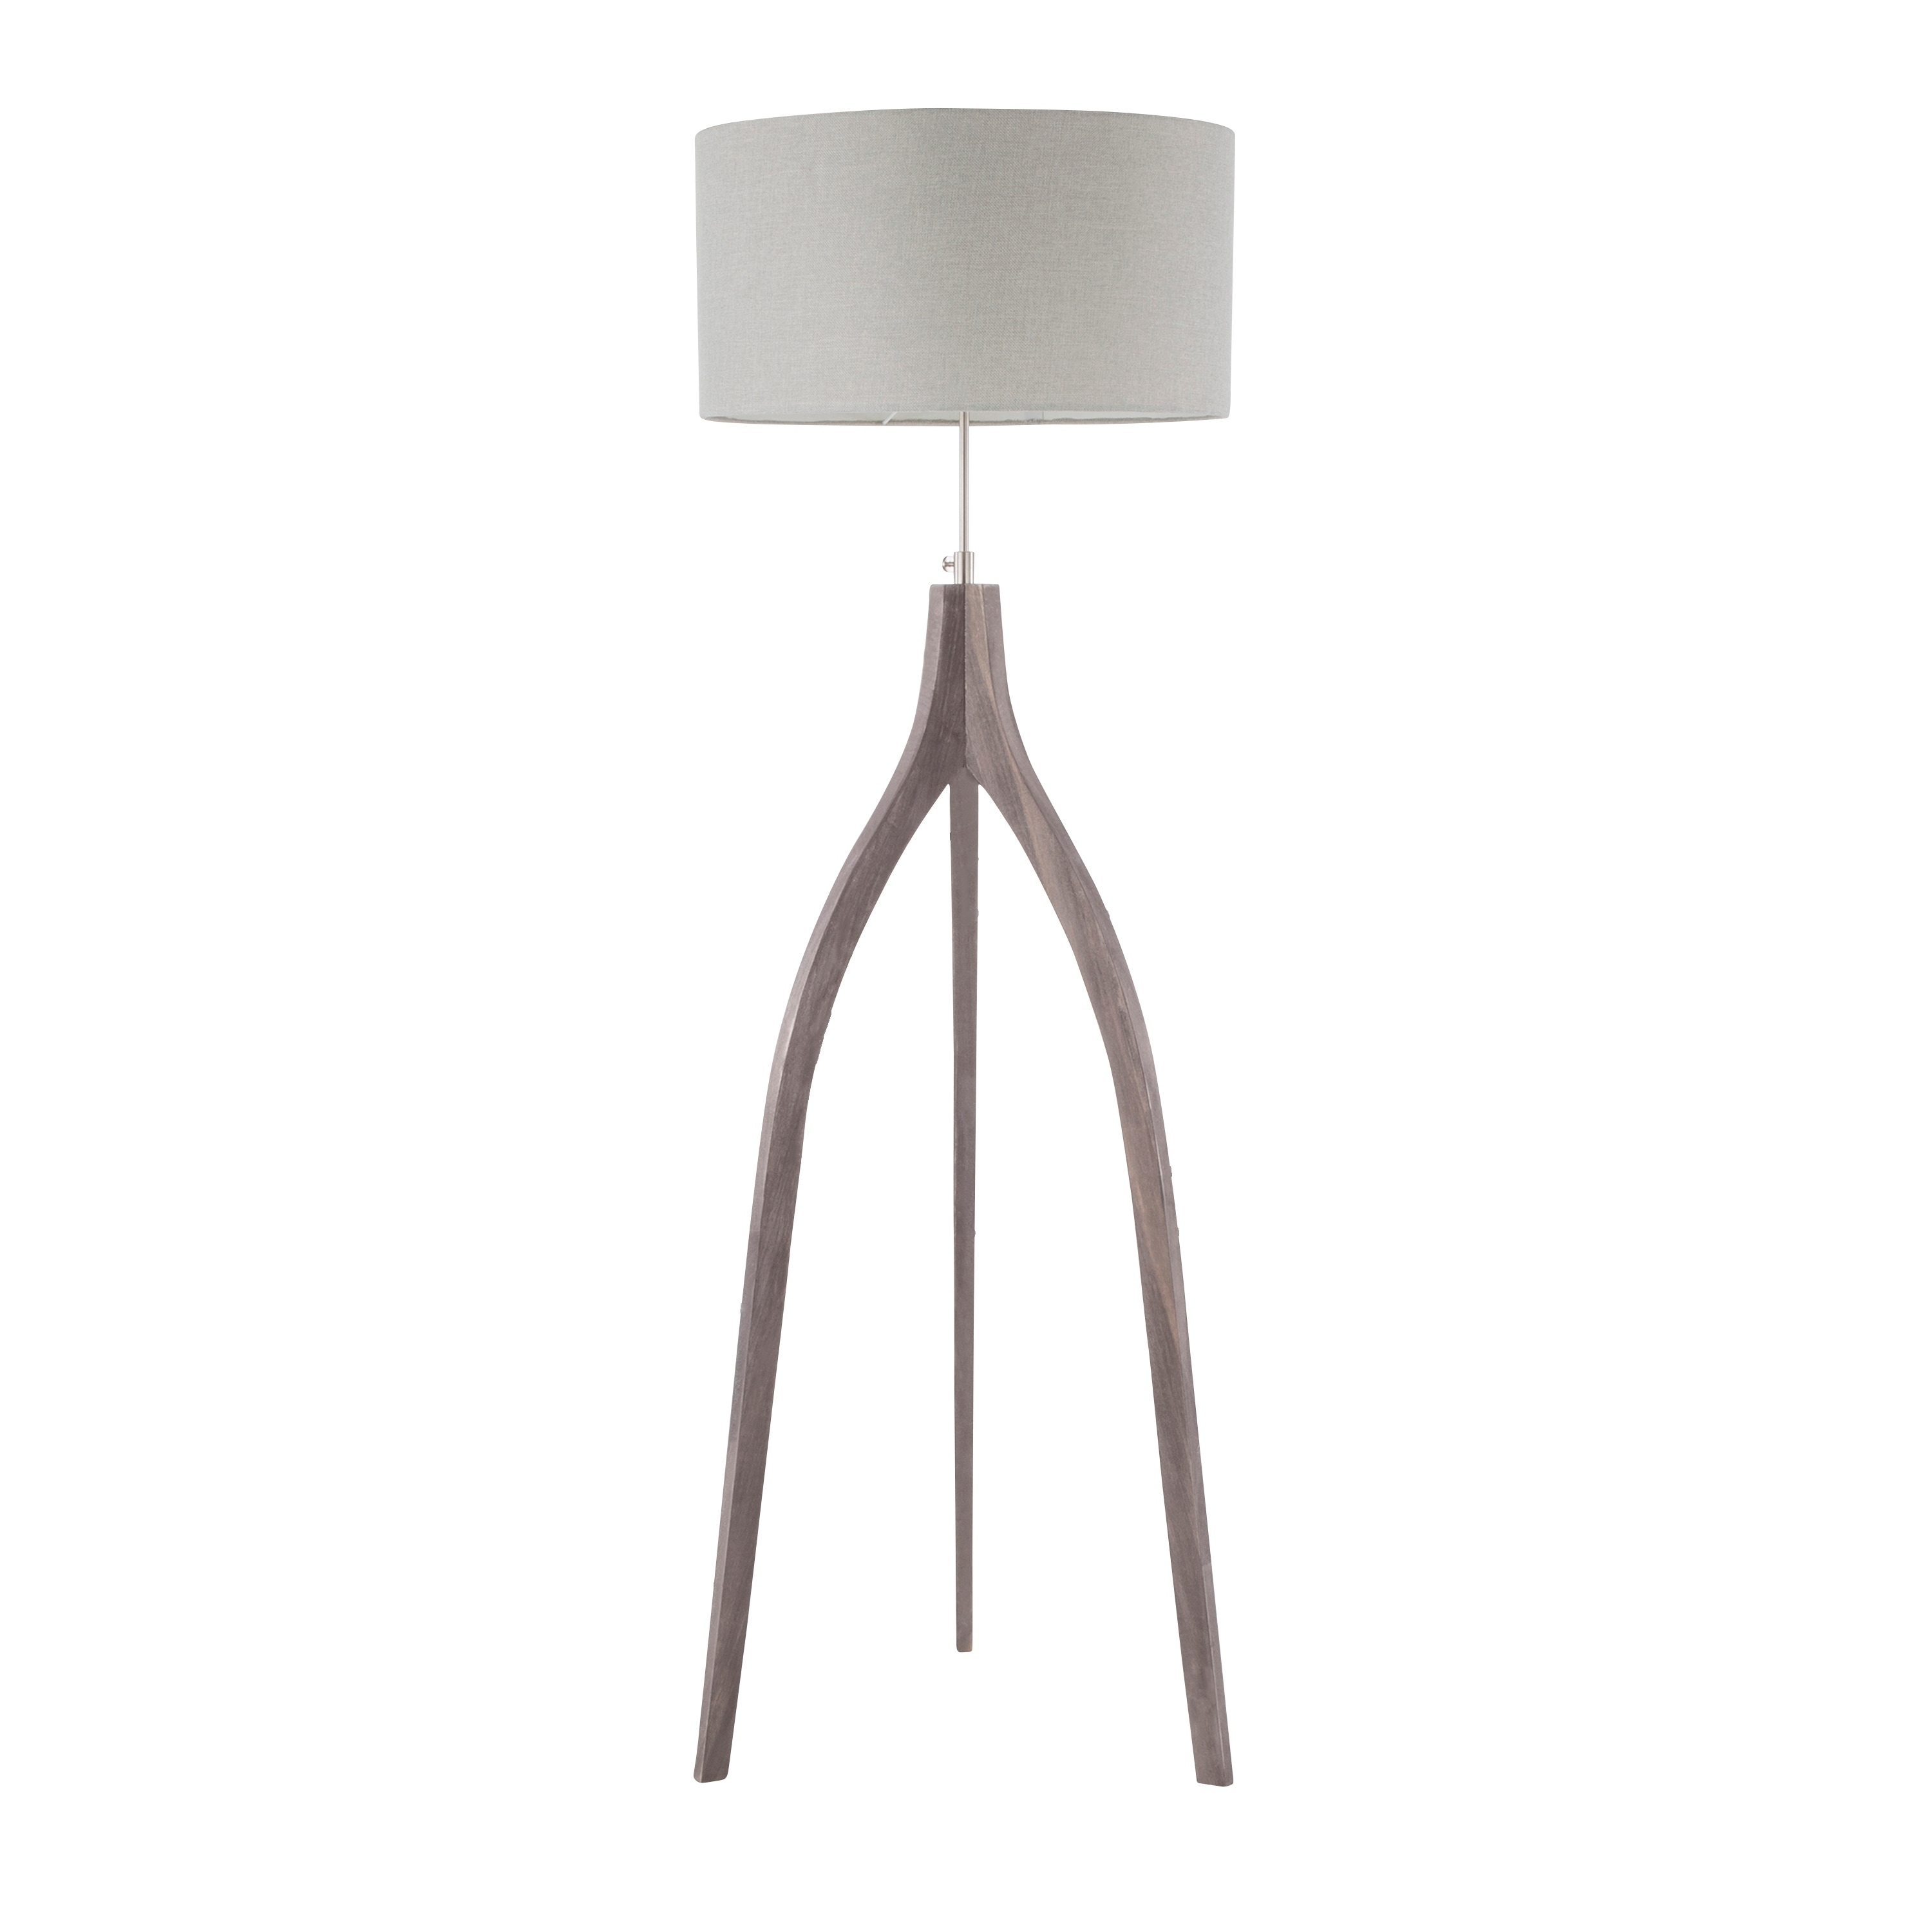 Shop The Gray Barn Brevet Contemporary Tripod Floor Lamp With